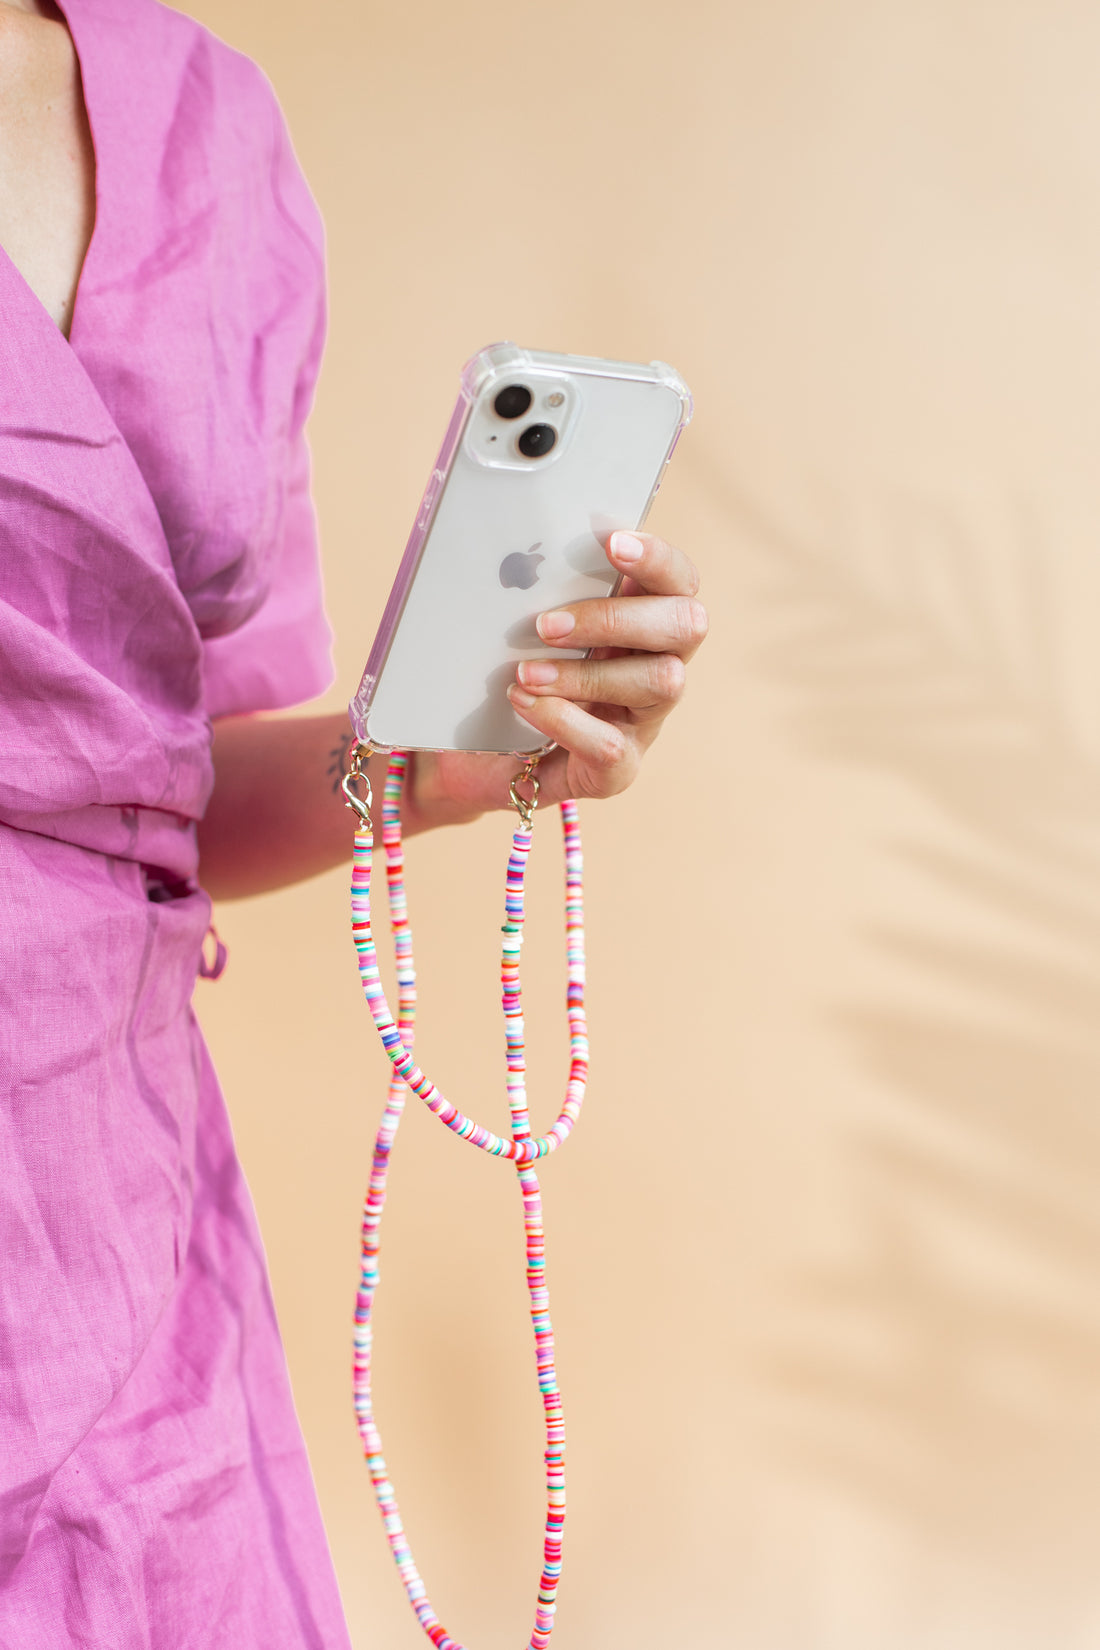 Phone case with candy cord